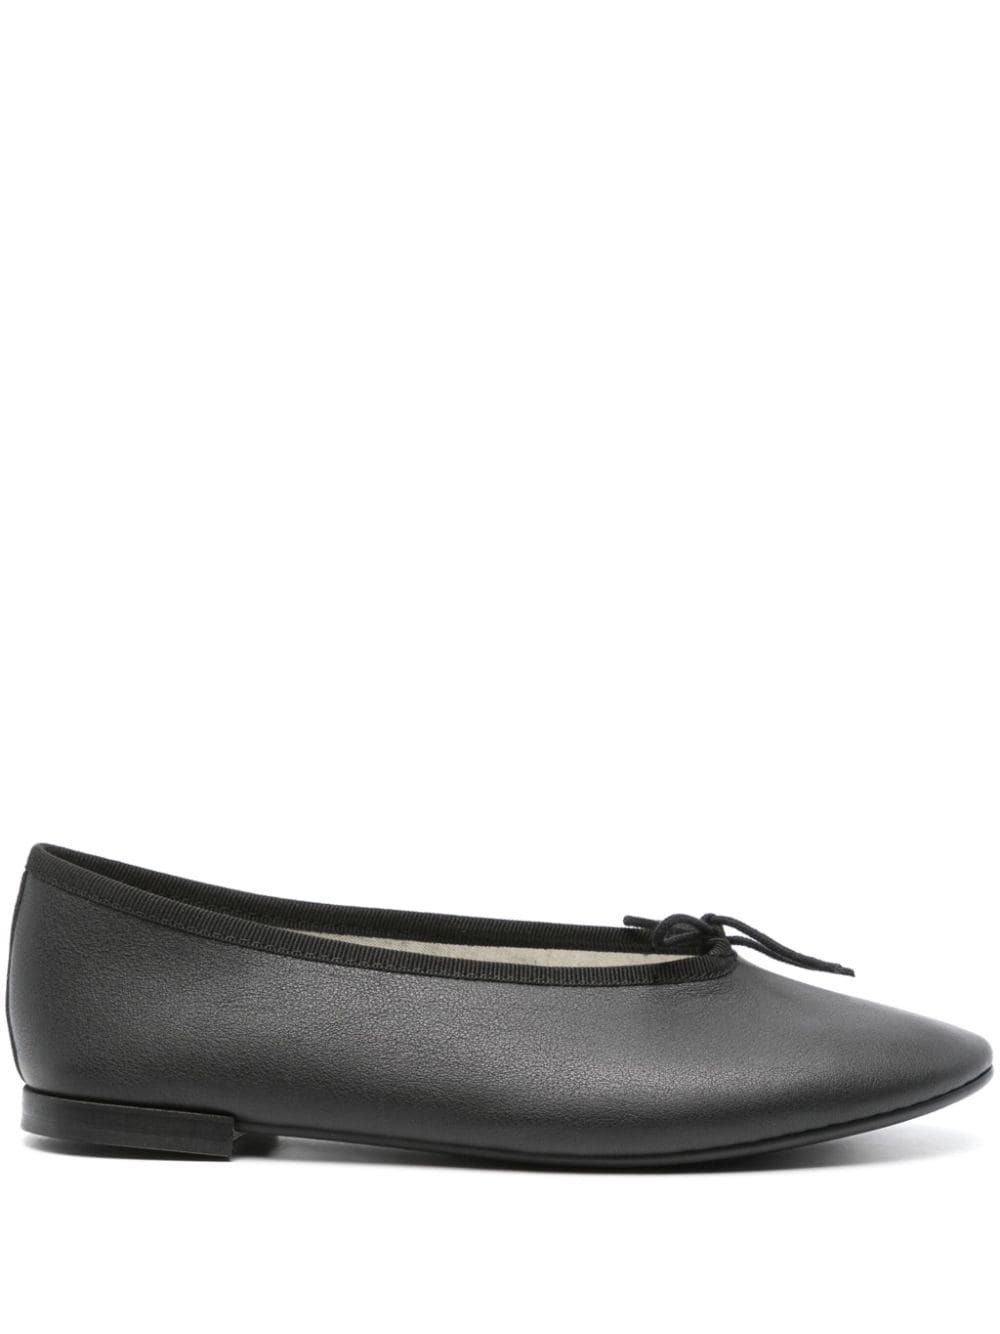 Image 1 of Repetto Lilouh leather ballerina shoes